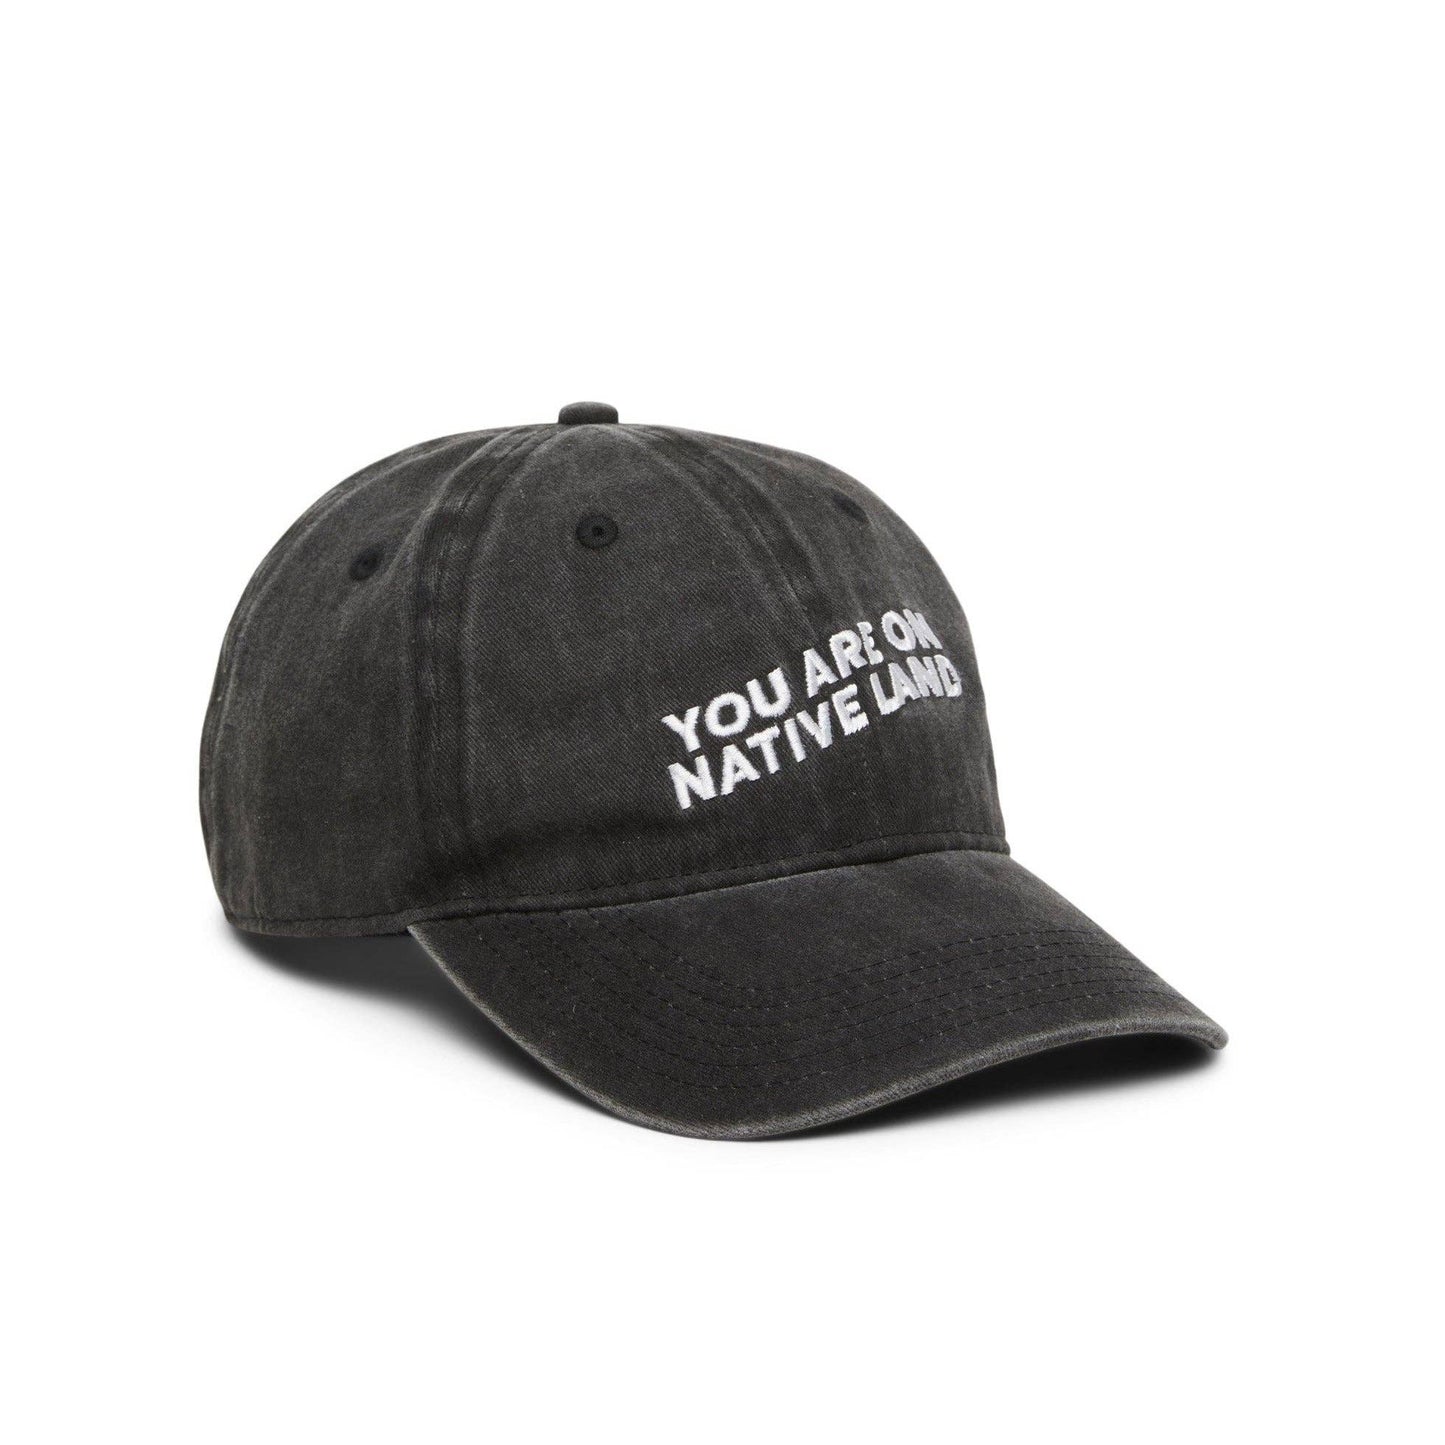 'You Are On Native Land' Hat - Black